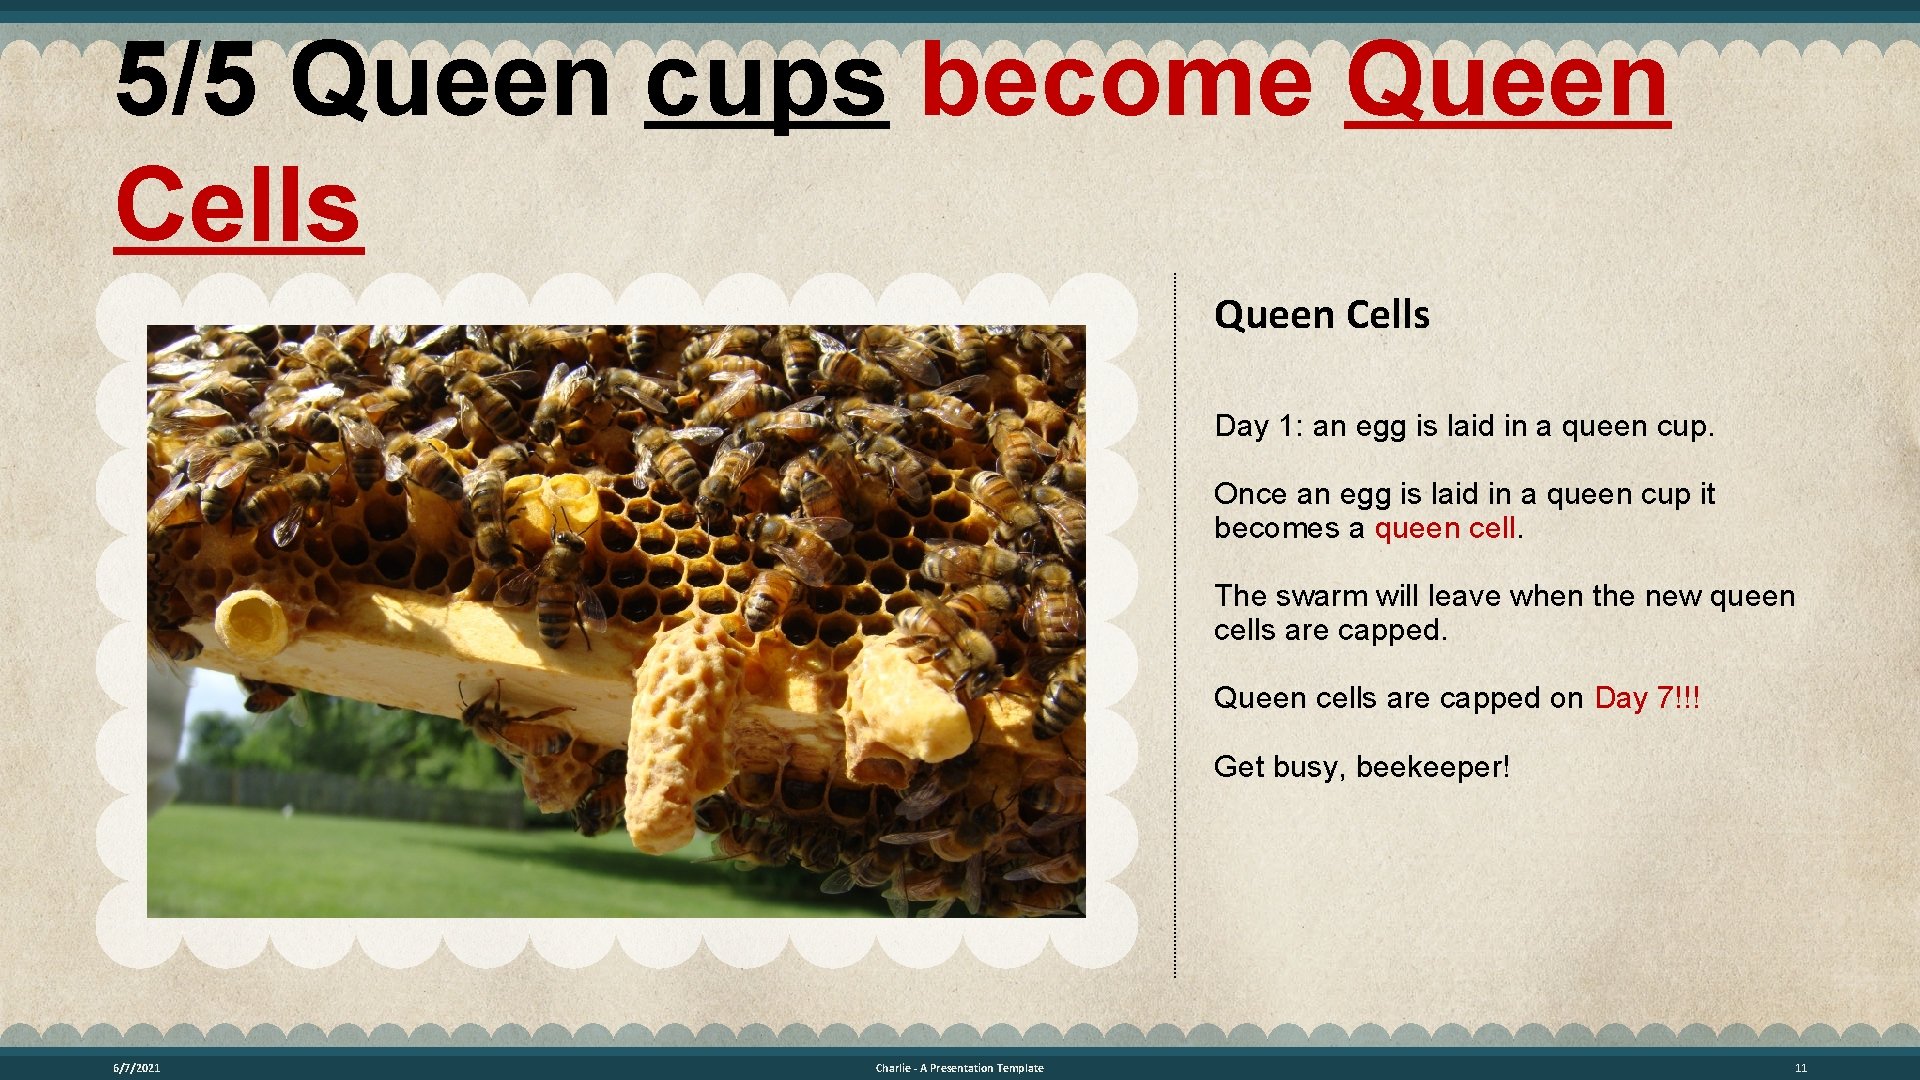 5/5 Queen cups become Queen Cells Day 1: an egg is laid in a